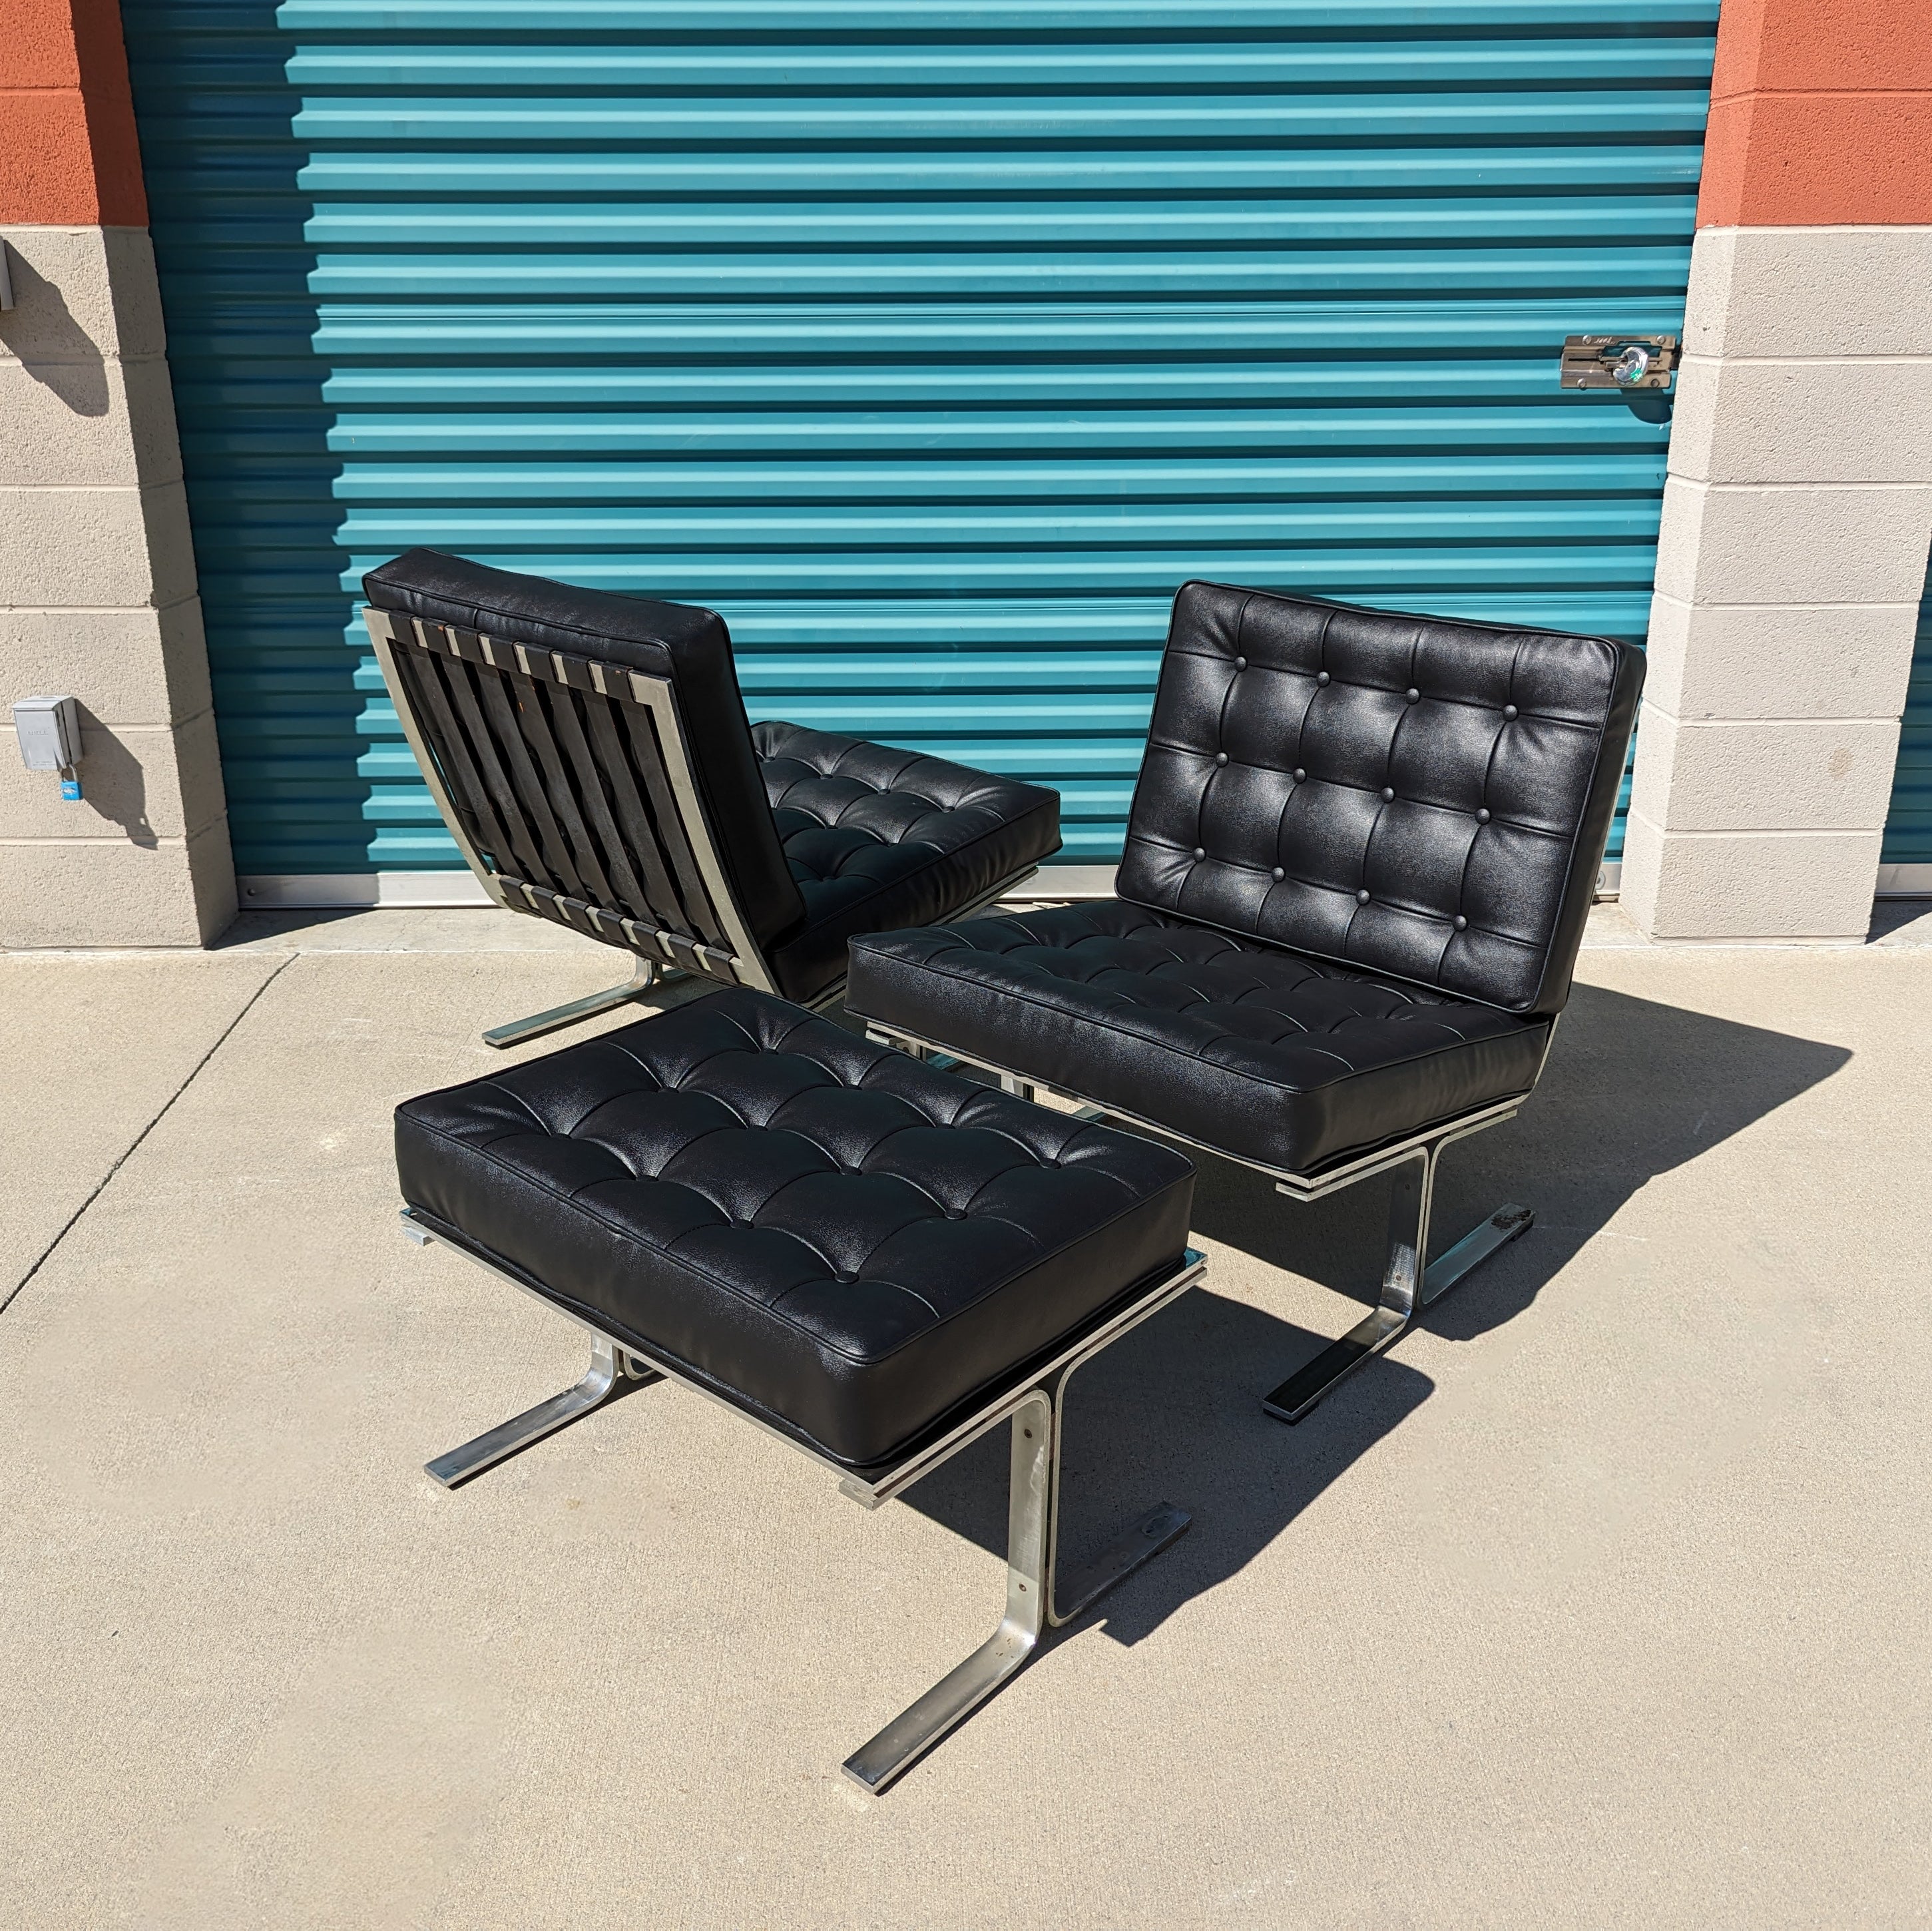 Just in, a rare pair of solid chrome chairs and ottoman (1) designed by Karl-Erik Ekselius for J. O. Carlsson, Sweden, c1960s. Reminiscent of Barcelona chairs, these beauties feature a heavy chrome metal frame and new marine vinyl cushions. Both the